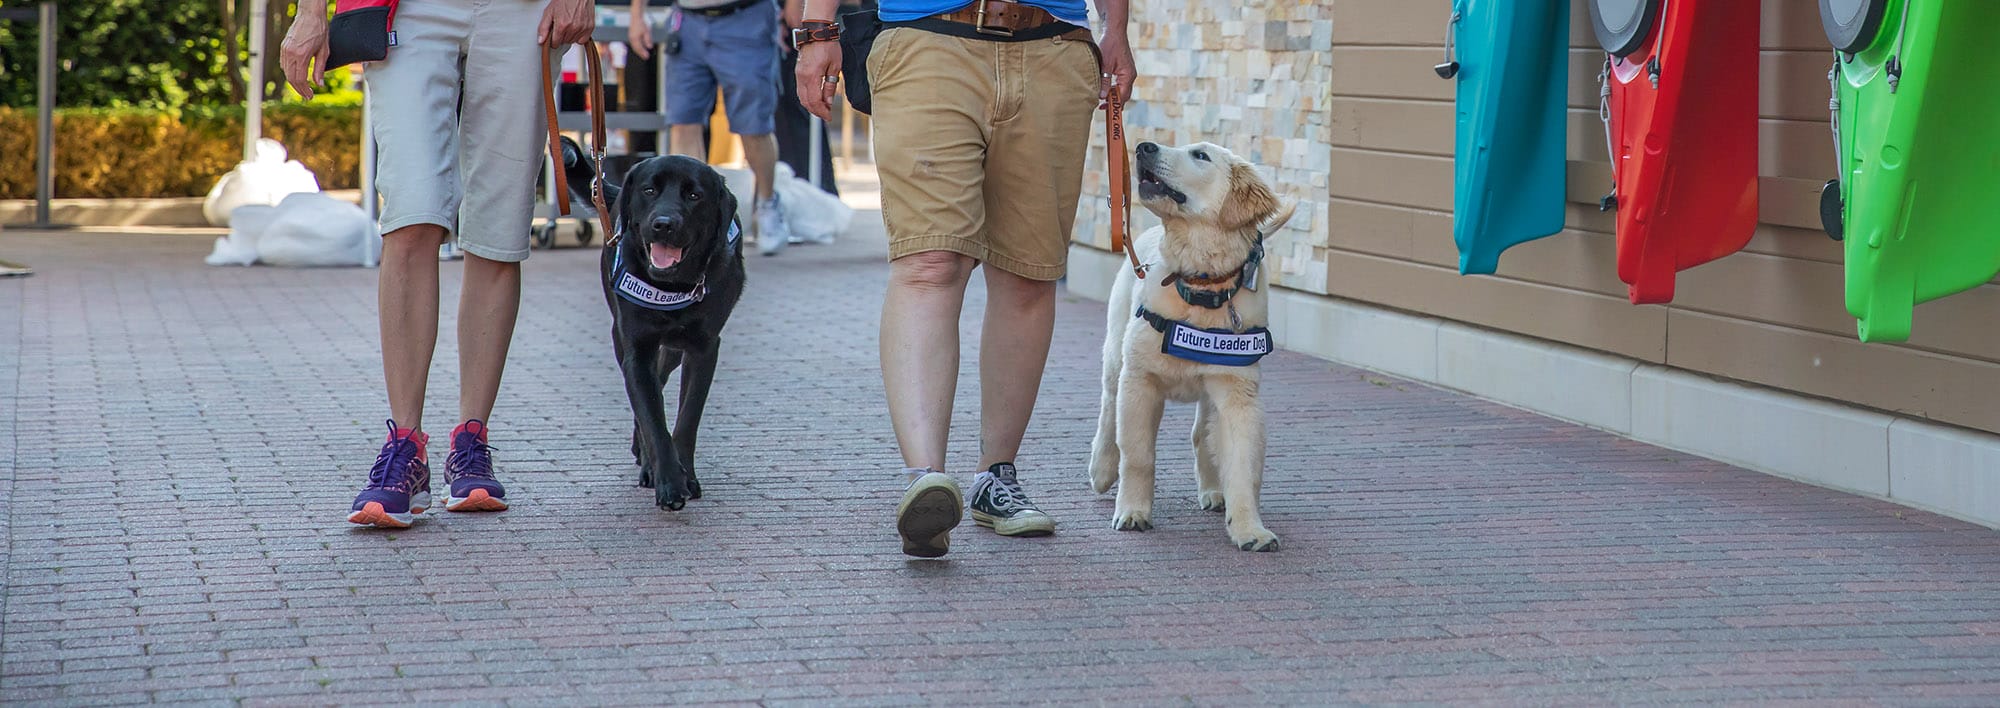 A young black lab and a young golden retriever in blue Future Leader Dog vests walk down a stone-lined road with people visible holding their leashes from the waist down.